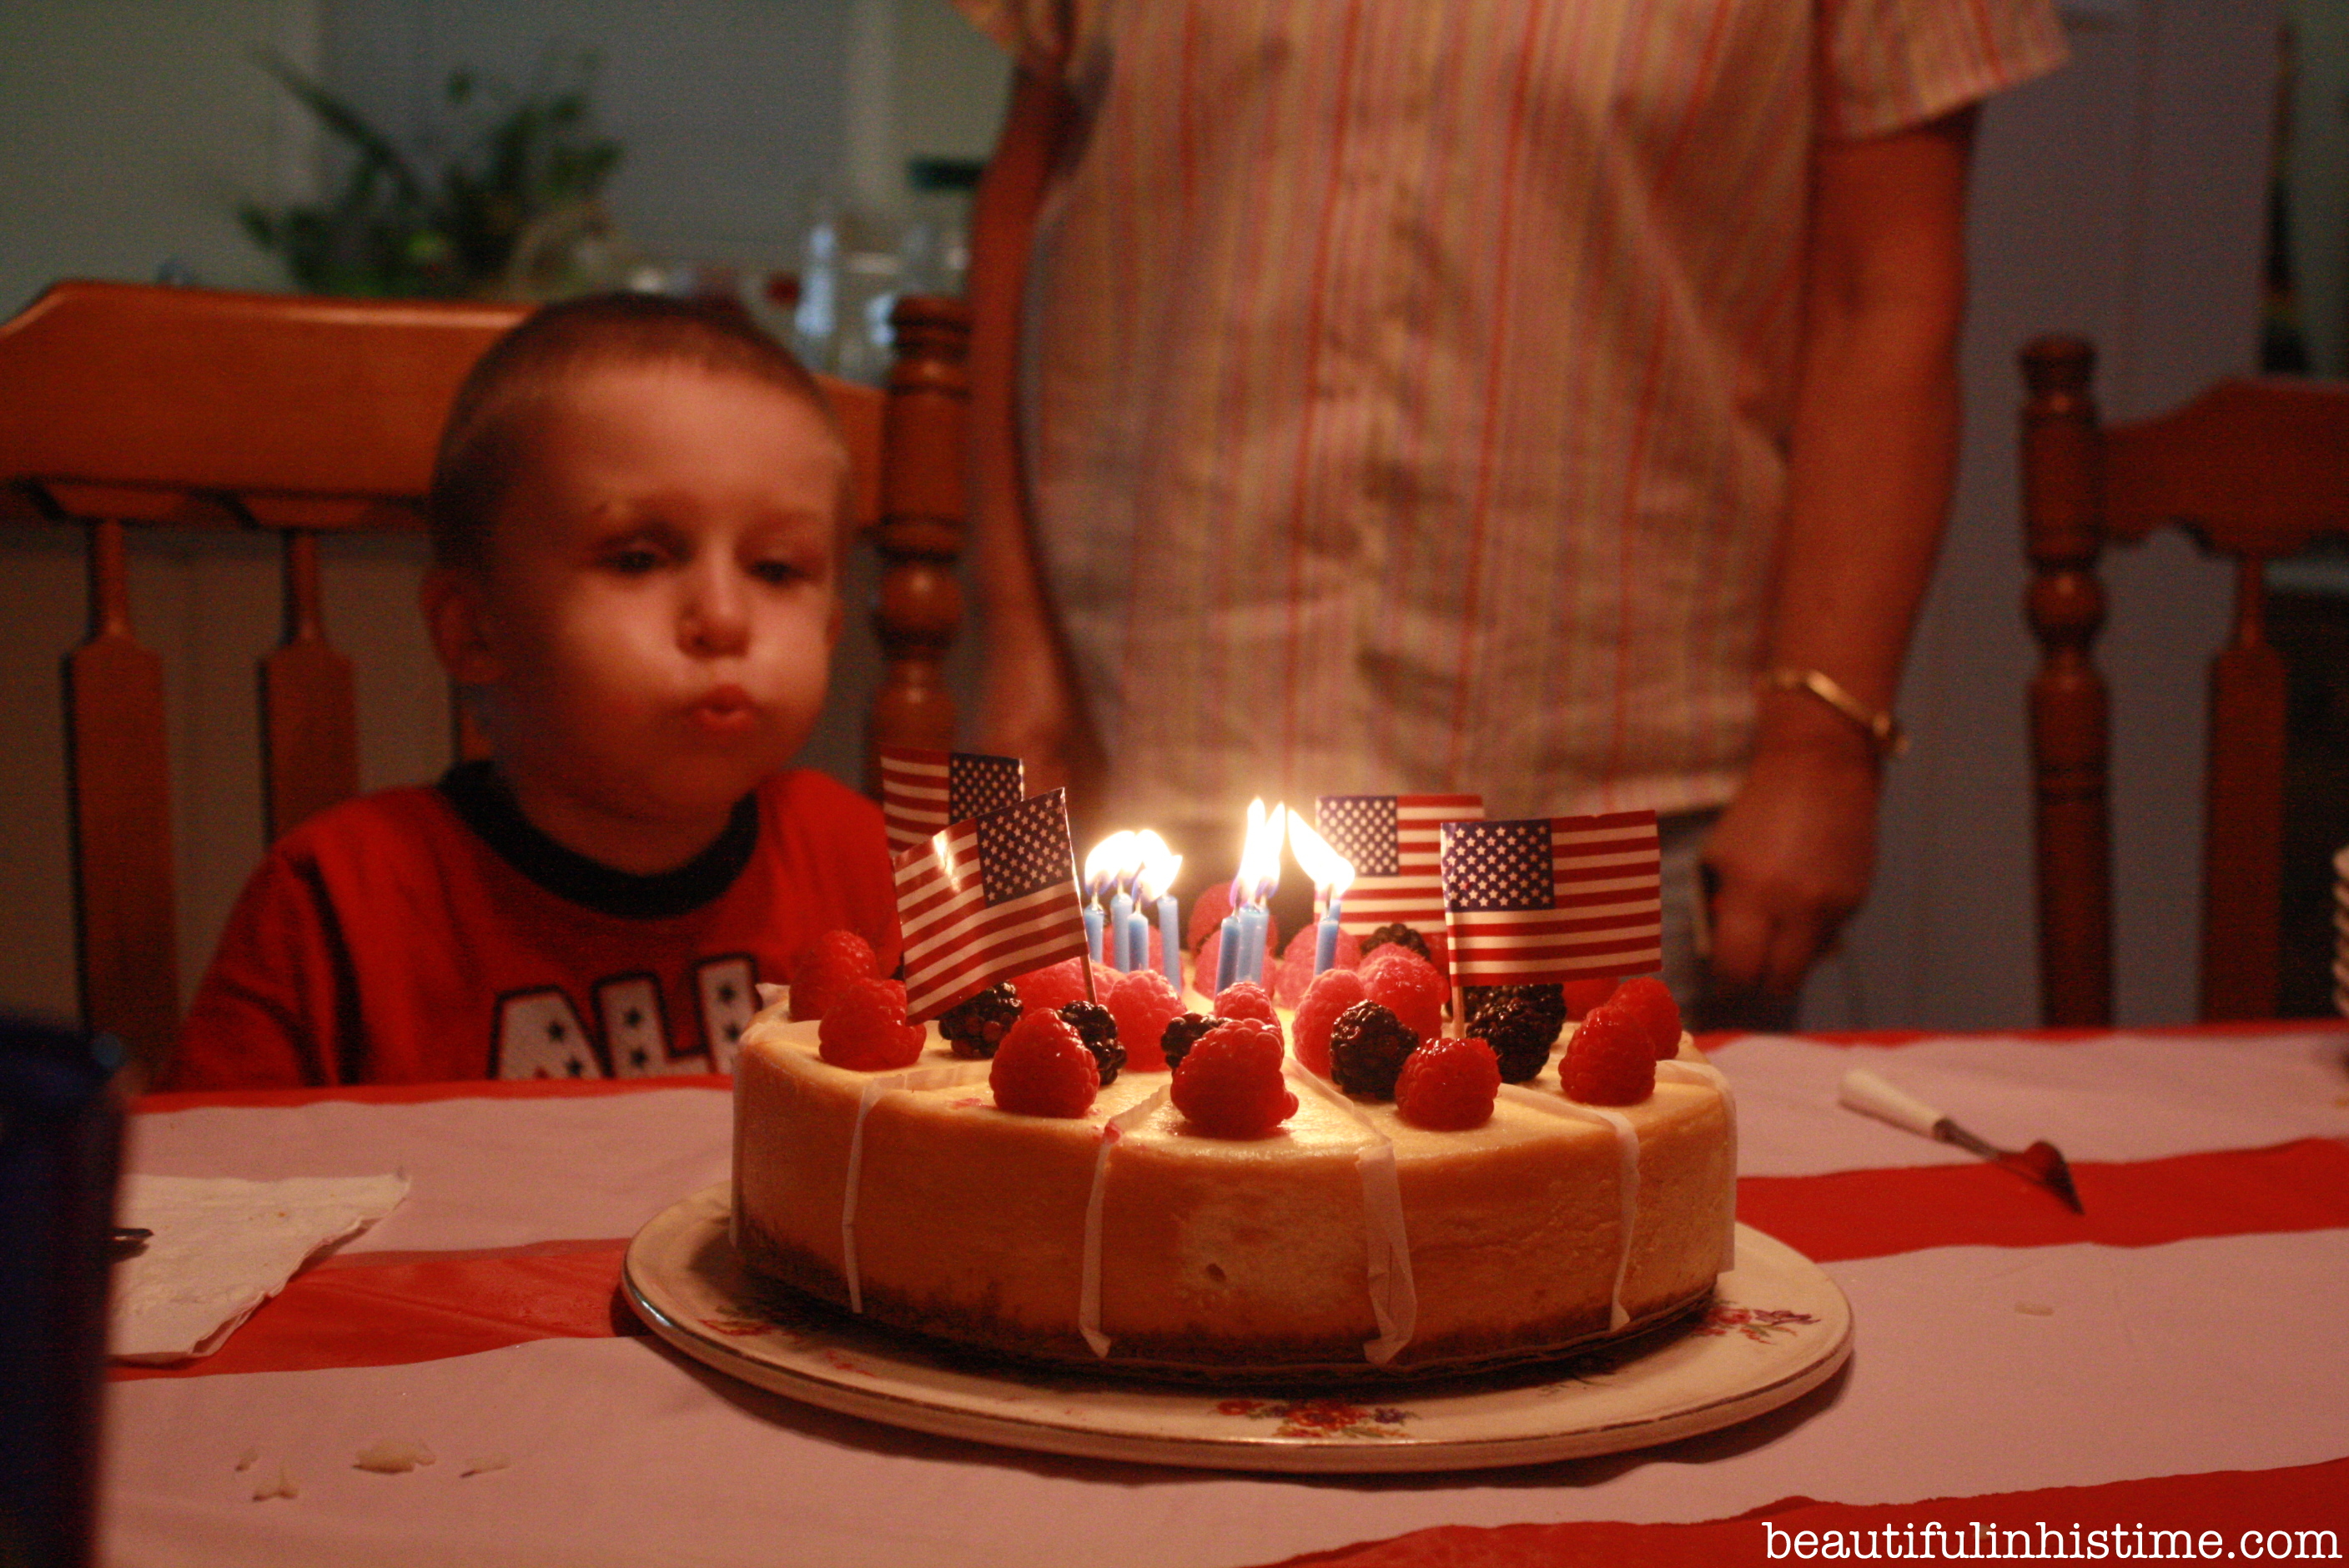 blowing out candles A Birthday Party for America! #birthday #america #4thofjuly #independenceday #party #birthdayparty